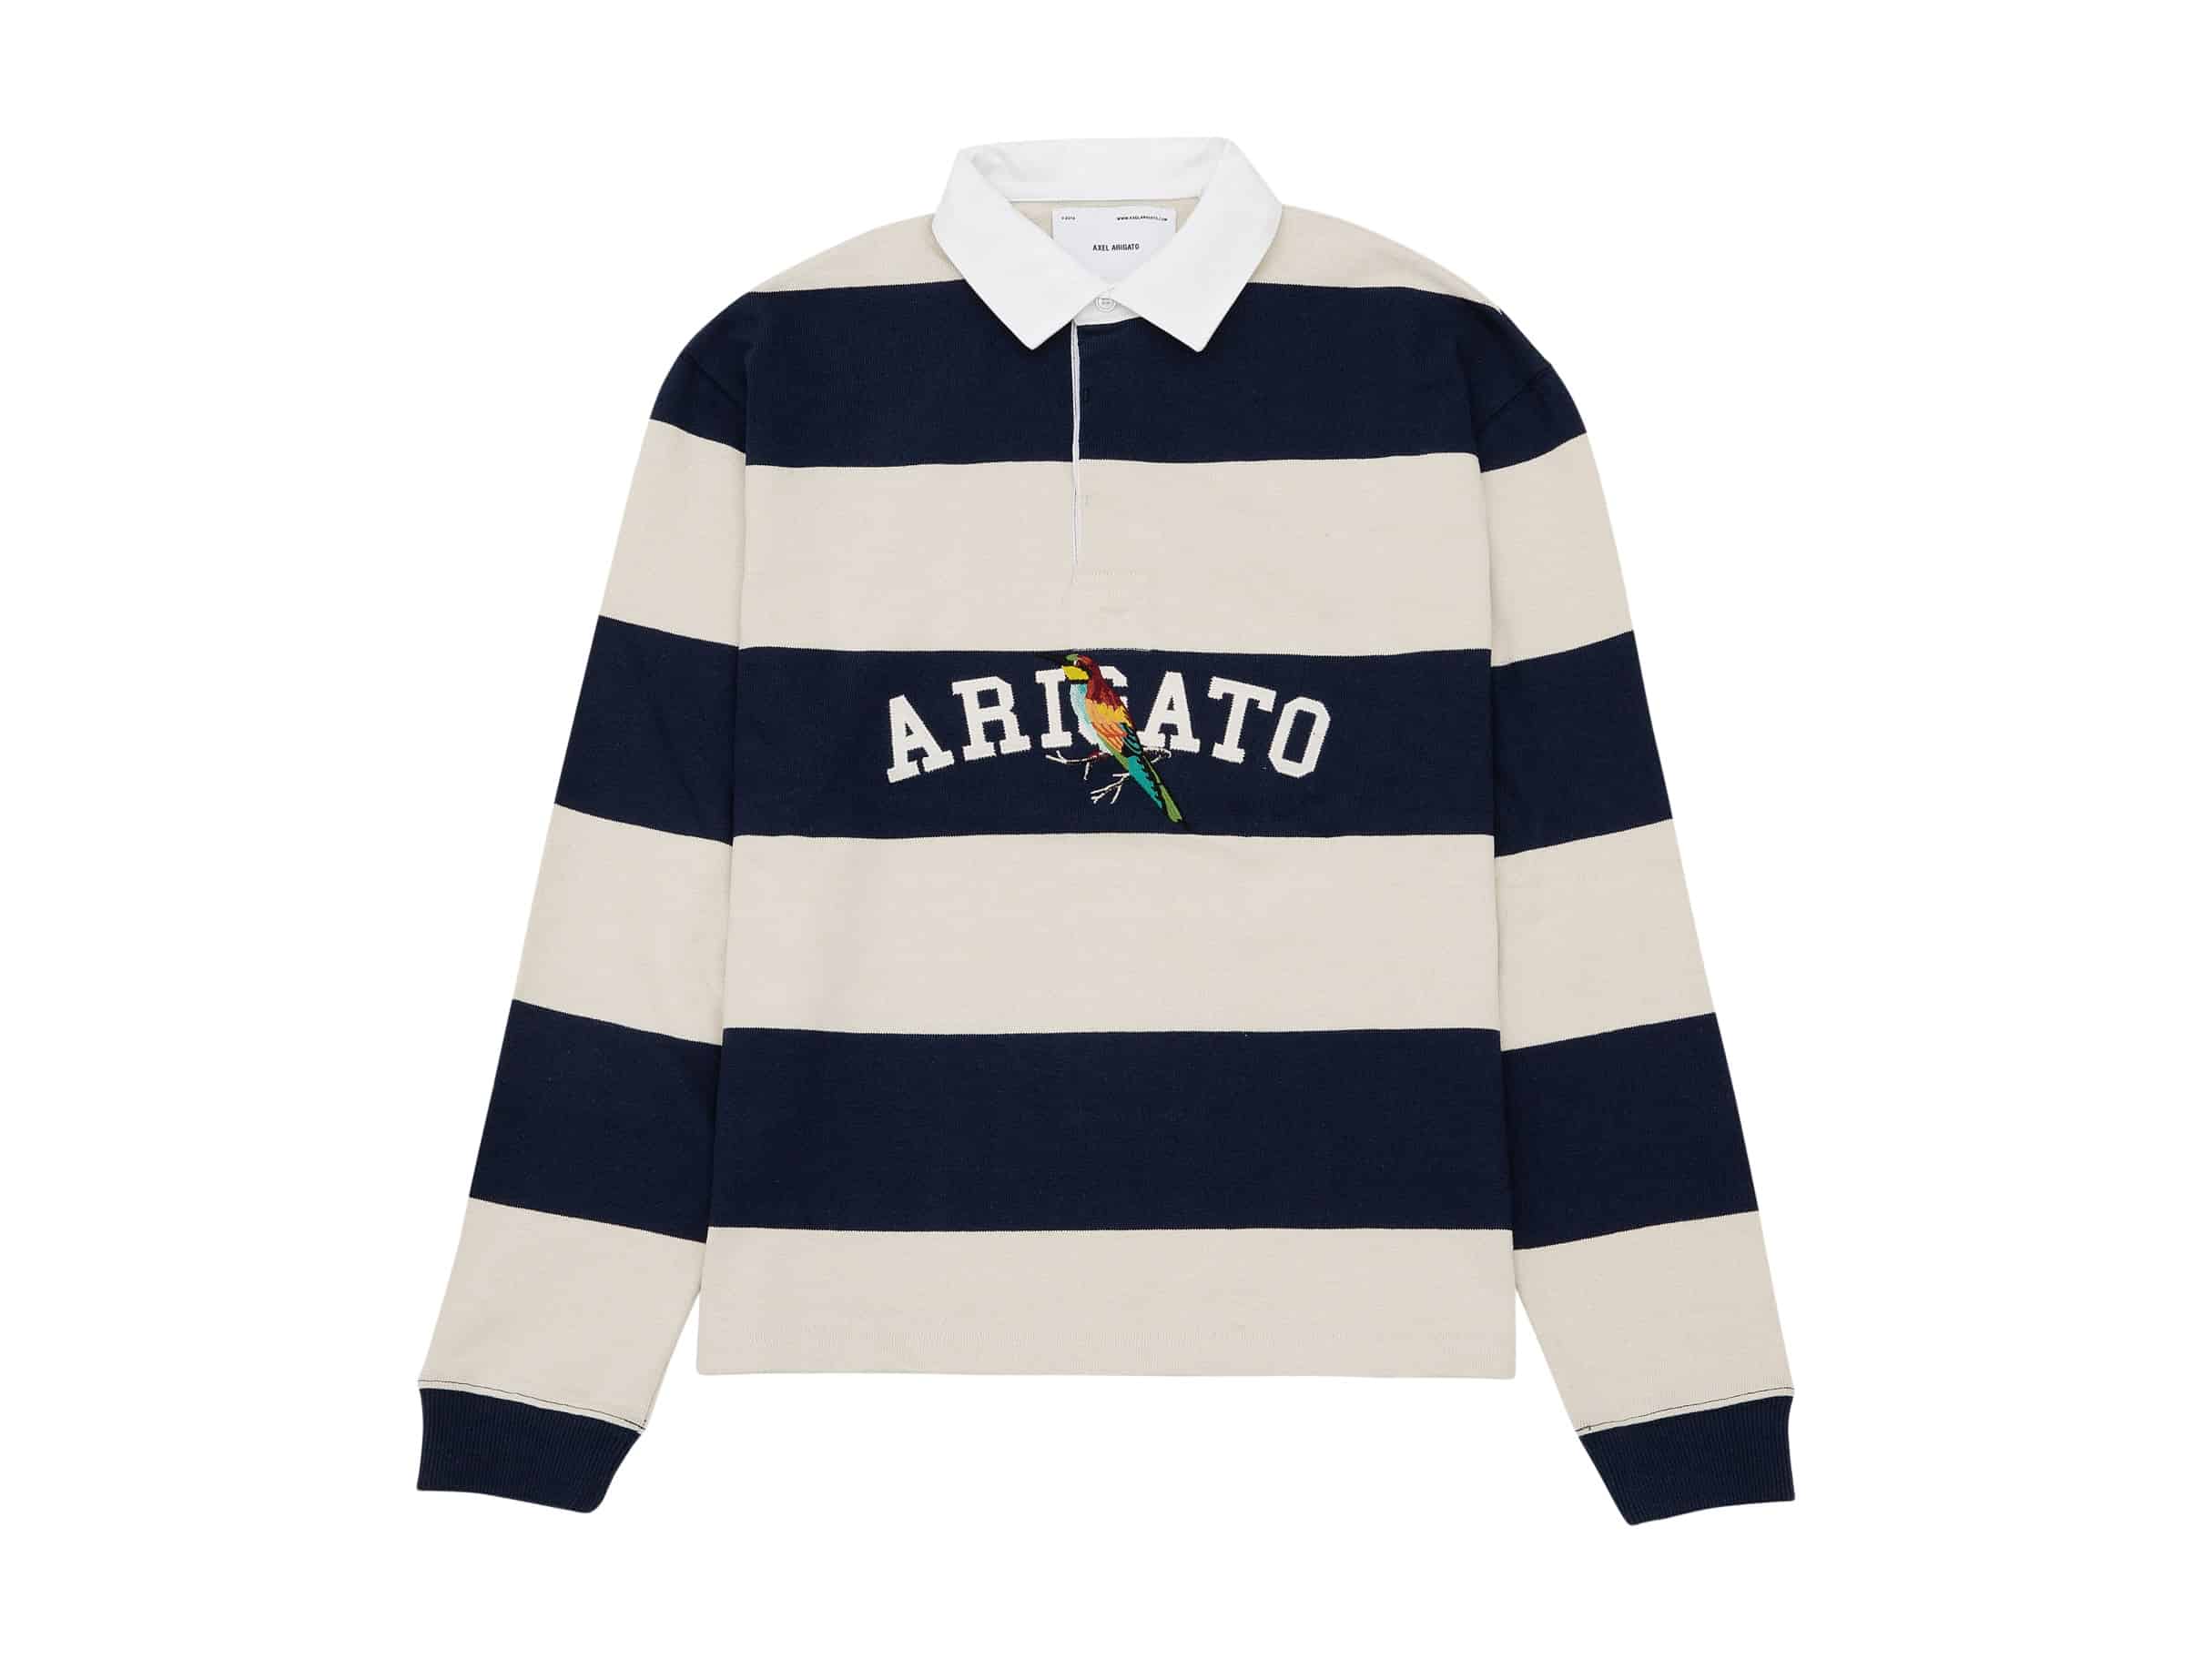 Axel Arigato Rugby Shirt